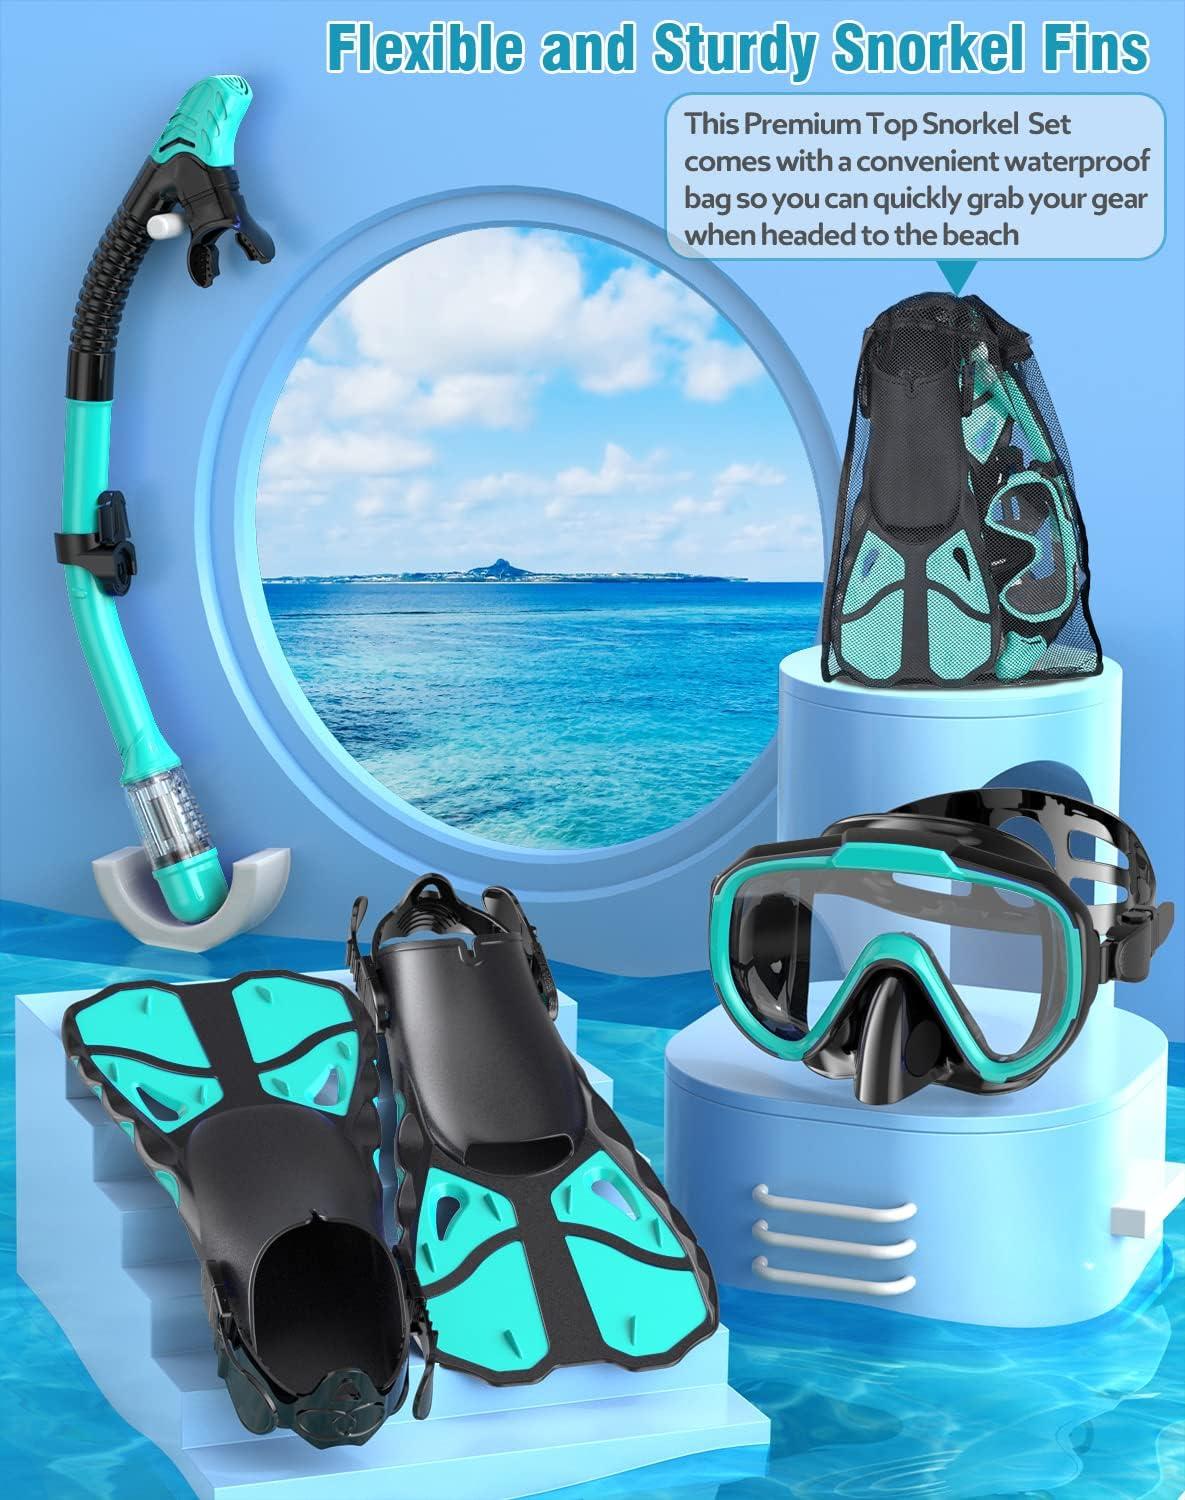 Vengreedo Snorkel Set with Fins for Adults, Mask Fins Snorkel Gear for Men  and Women, Dry Top Snorkel Mask Snorkel Fins Combo Set with Travel Bag for  Snorkeling, Diving, Swimming S/M Cyan